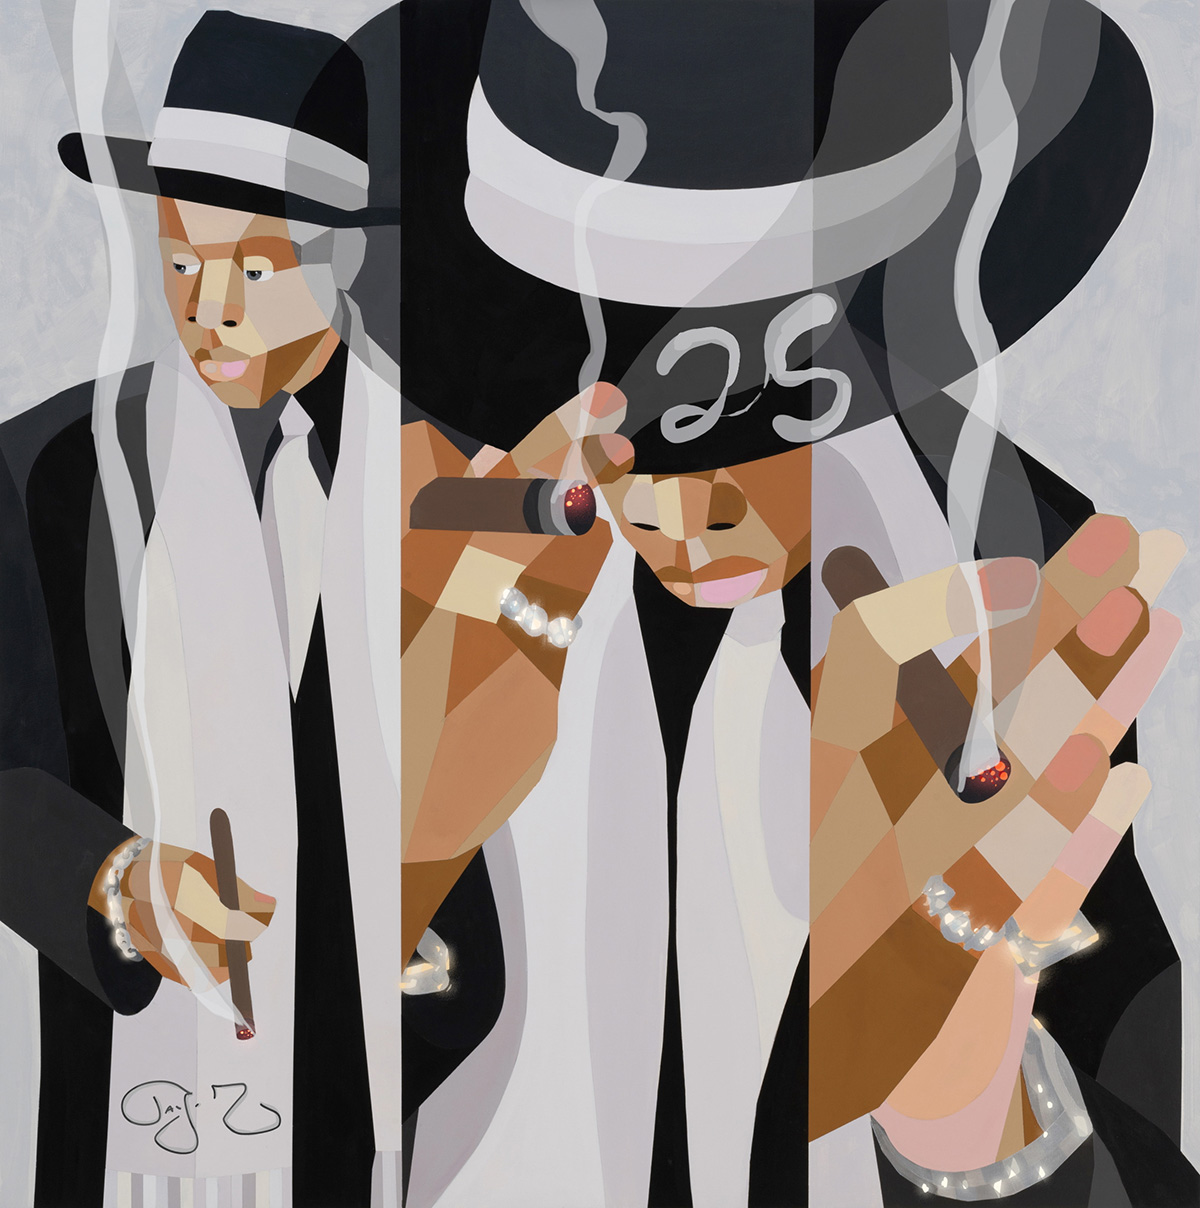 A simple illustration of Jay Z holding a cigar and wearing a hat and scarf. The hat has the number 25 on the brim.